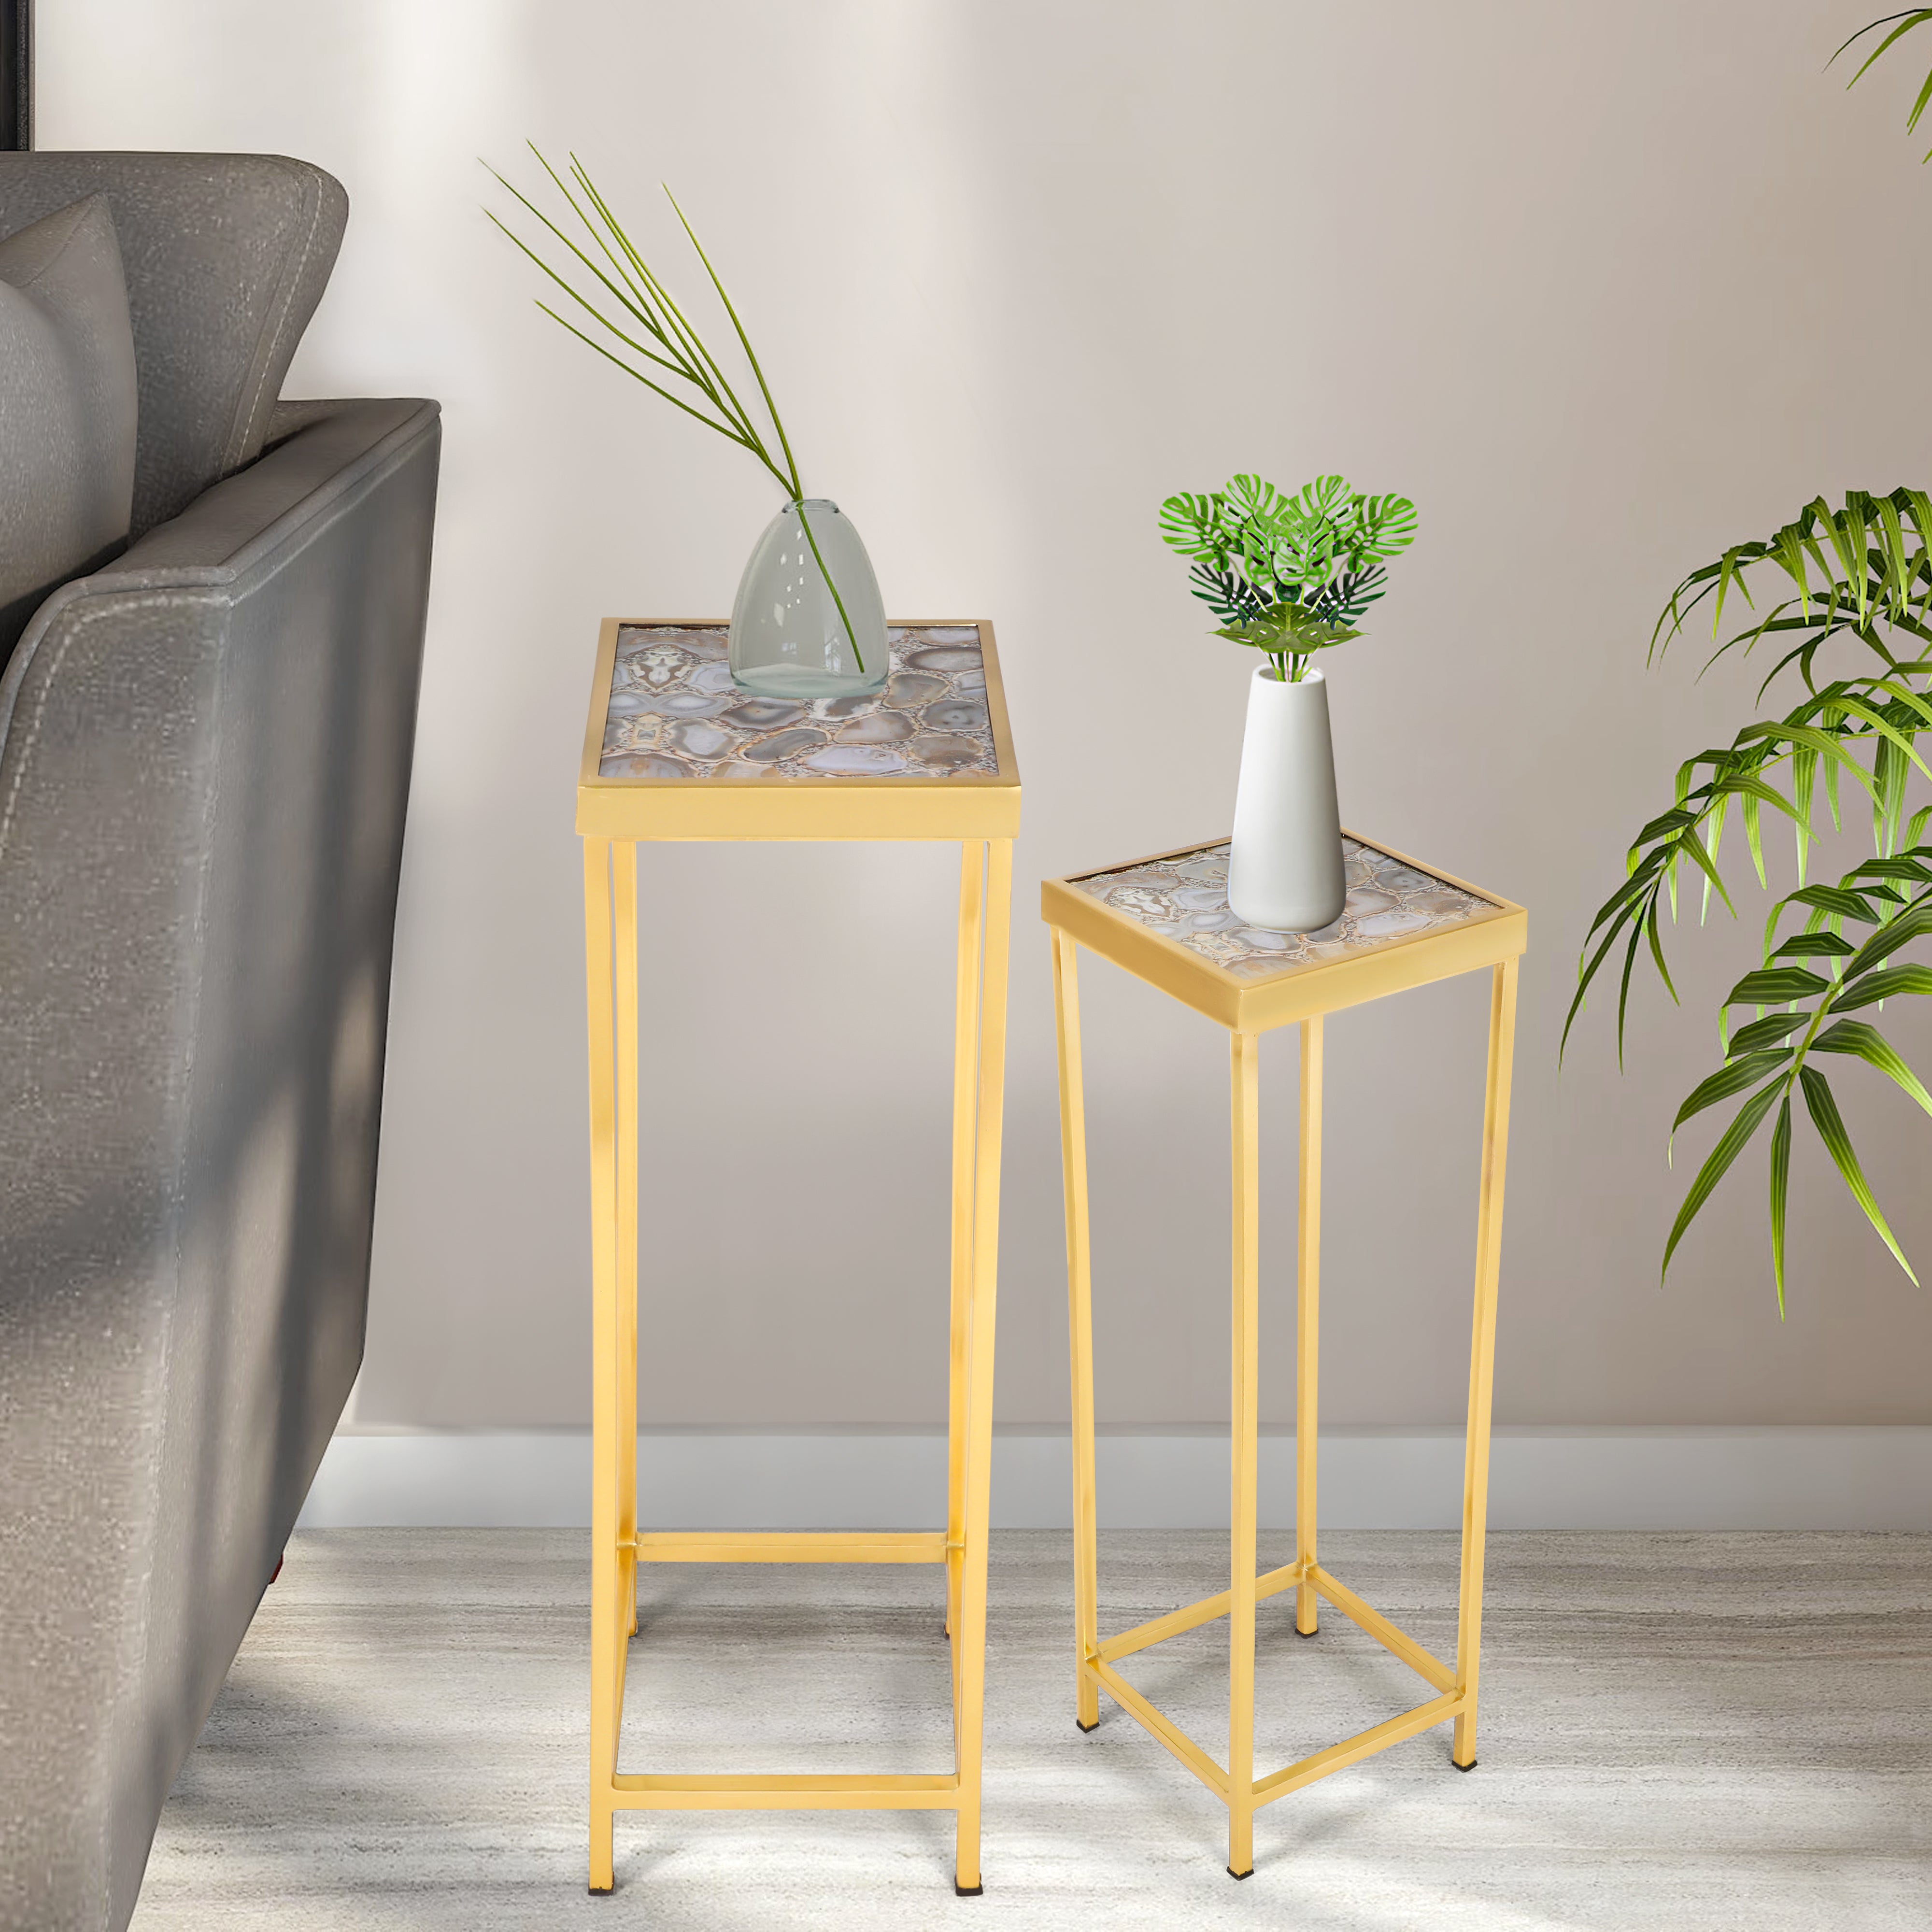 End Table Set Of 2 - Agate Side Table 11- The Home Co.